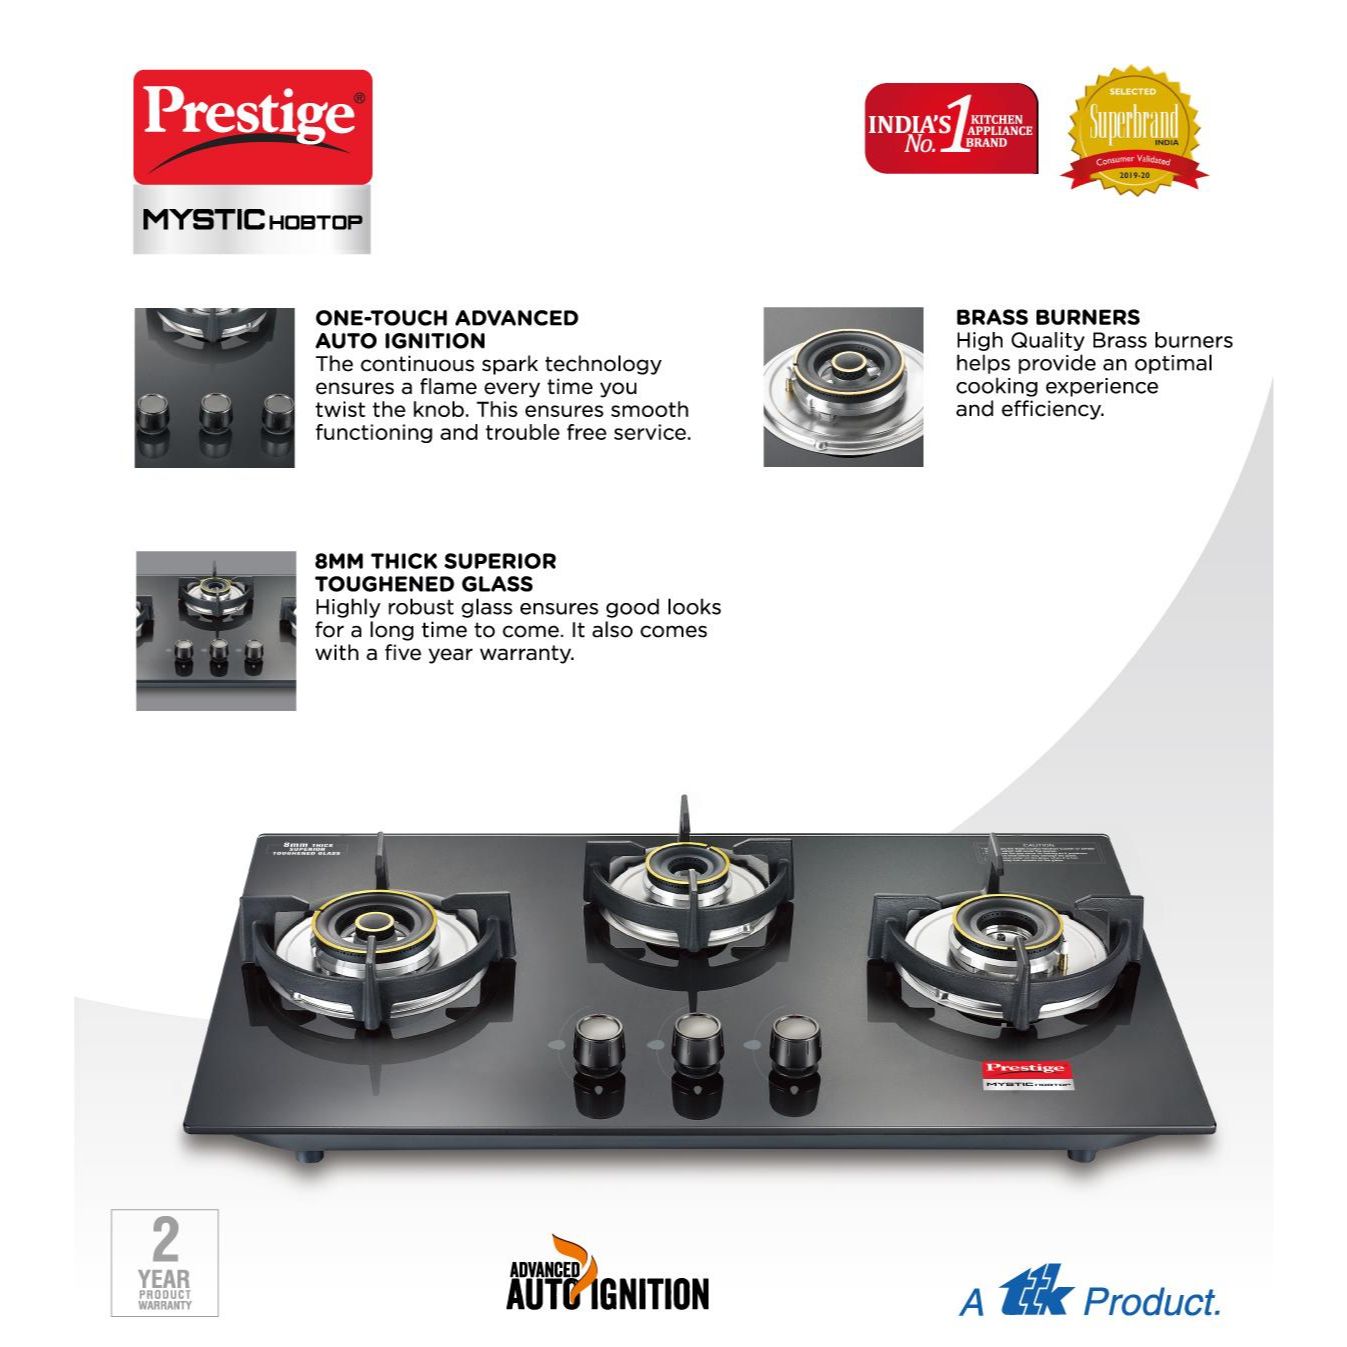 Prestige Mystic Hobtop PHTM 03 AI Glass Top Hob Gas Stove with One-Touch Advanced Auto-Ignition, 3 Burner